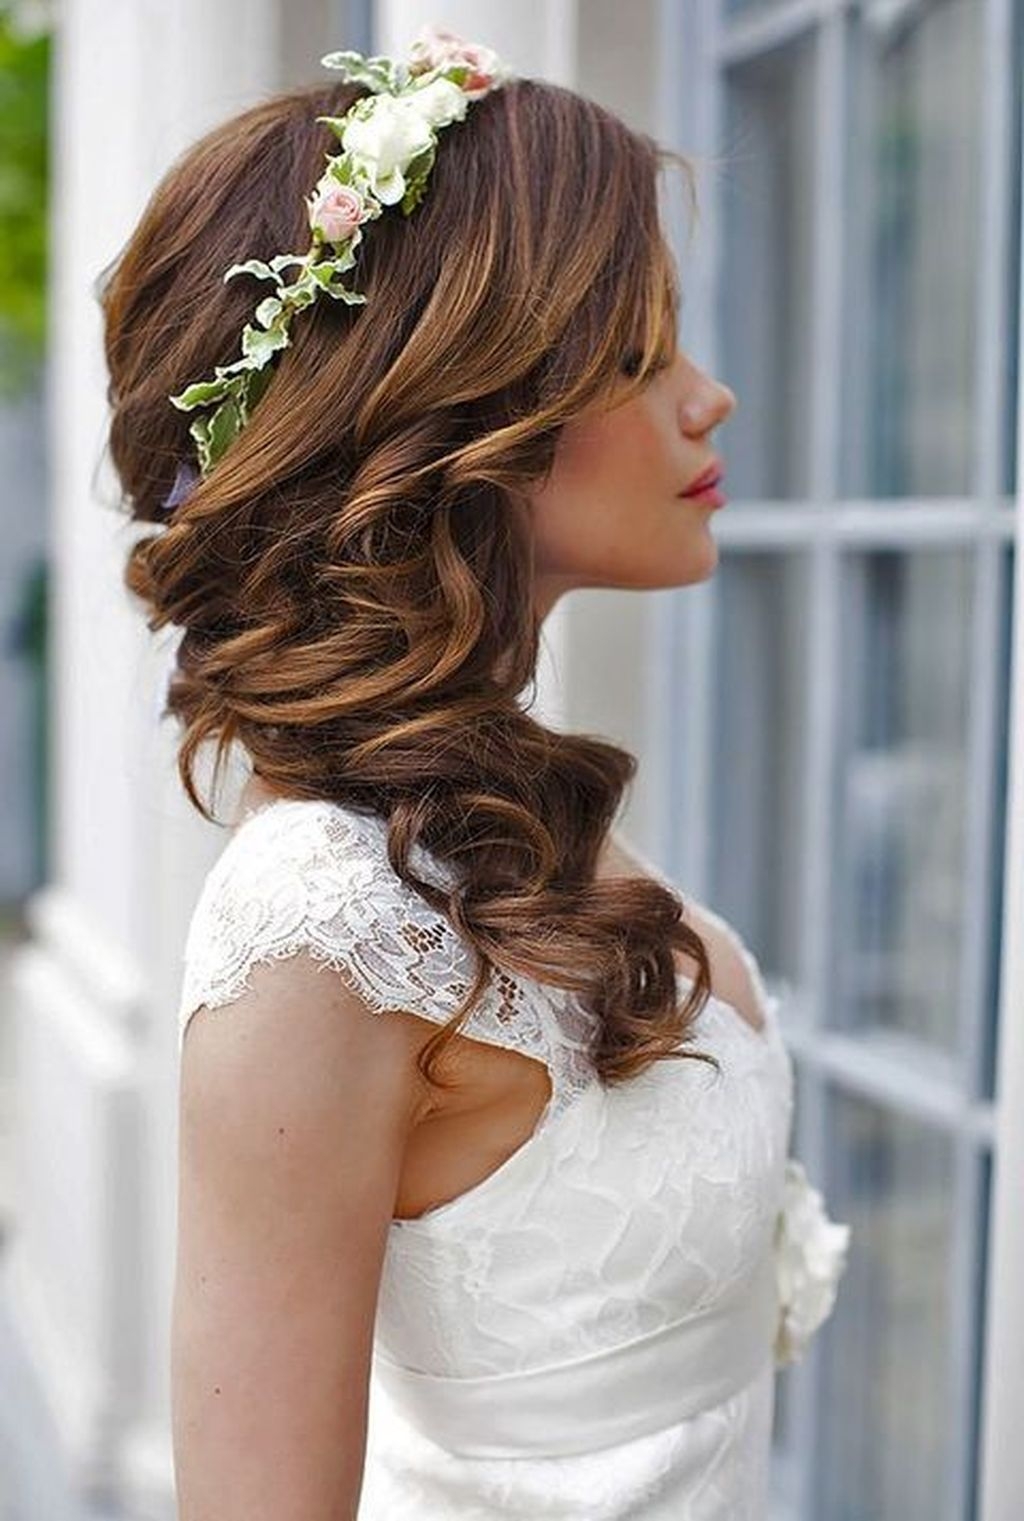 40 Elegant Wedding Hairstyle Ideas For Brides To Try